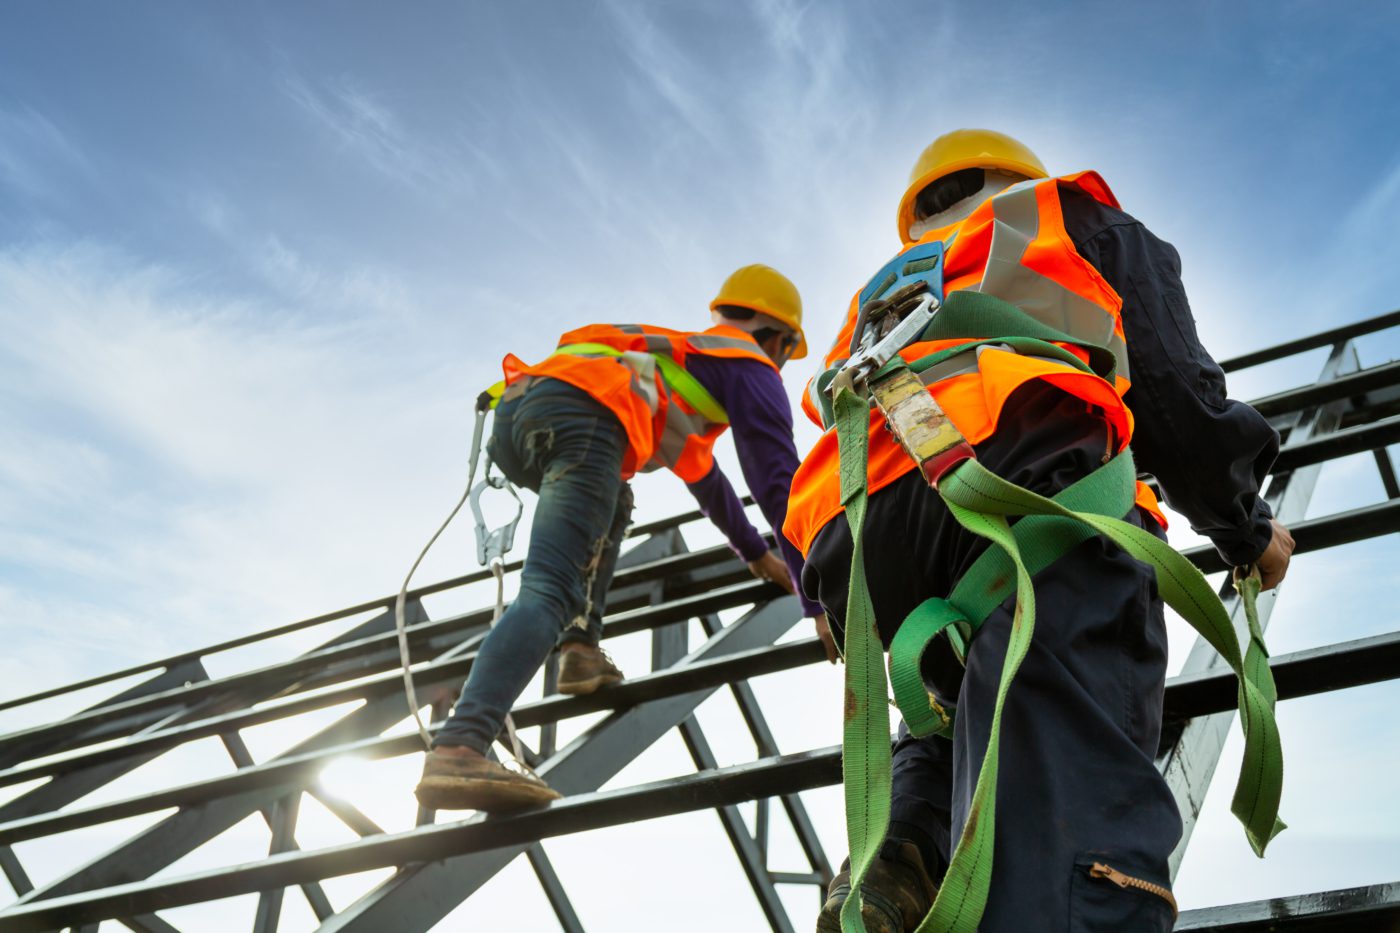 A safety team works at height